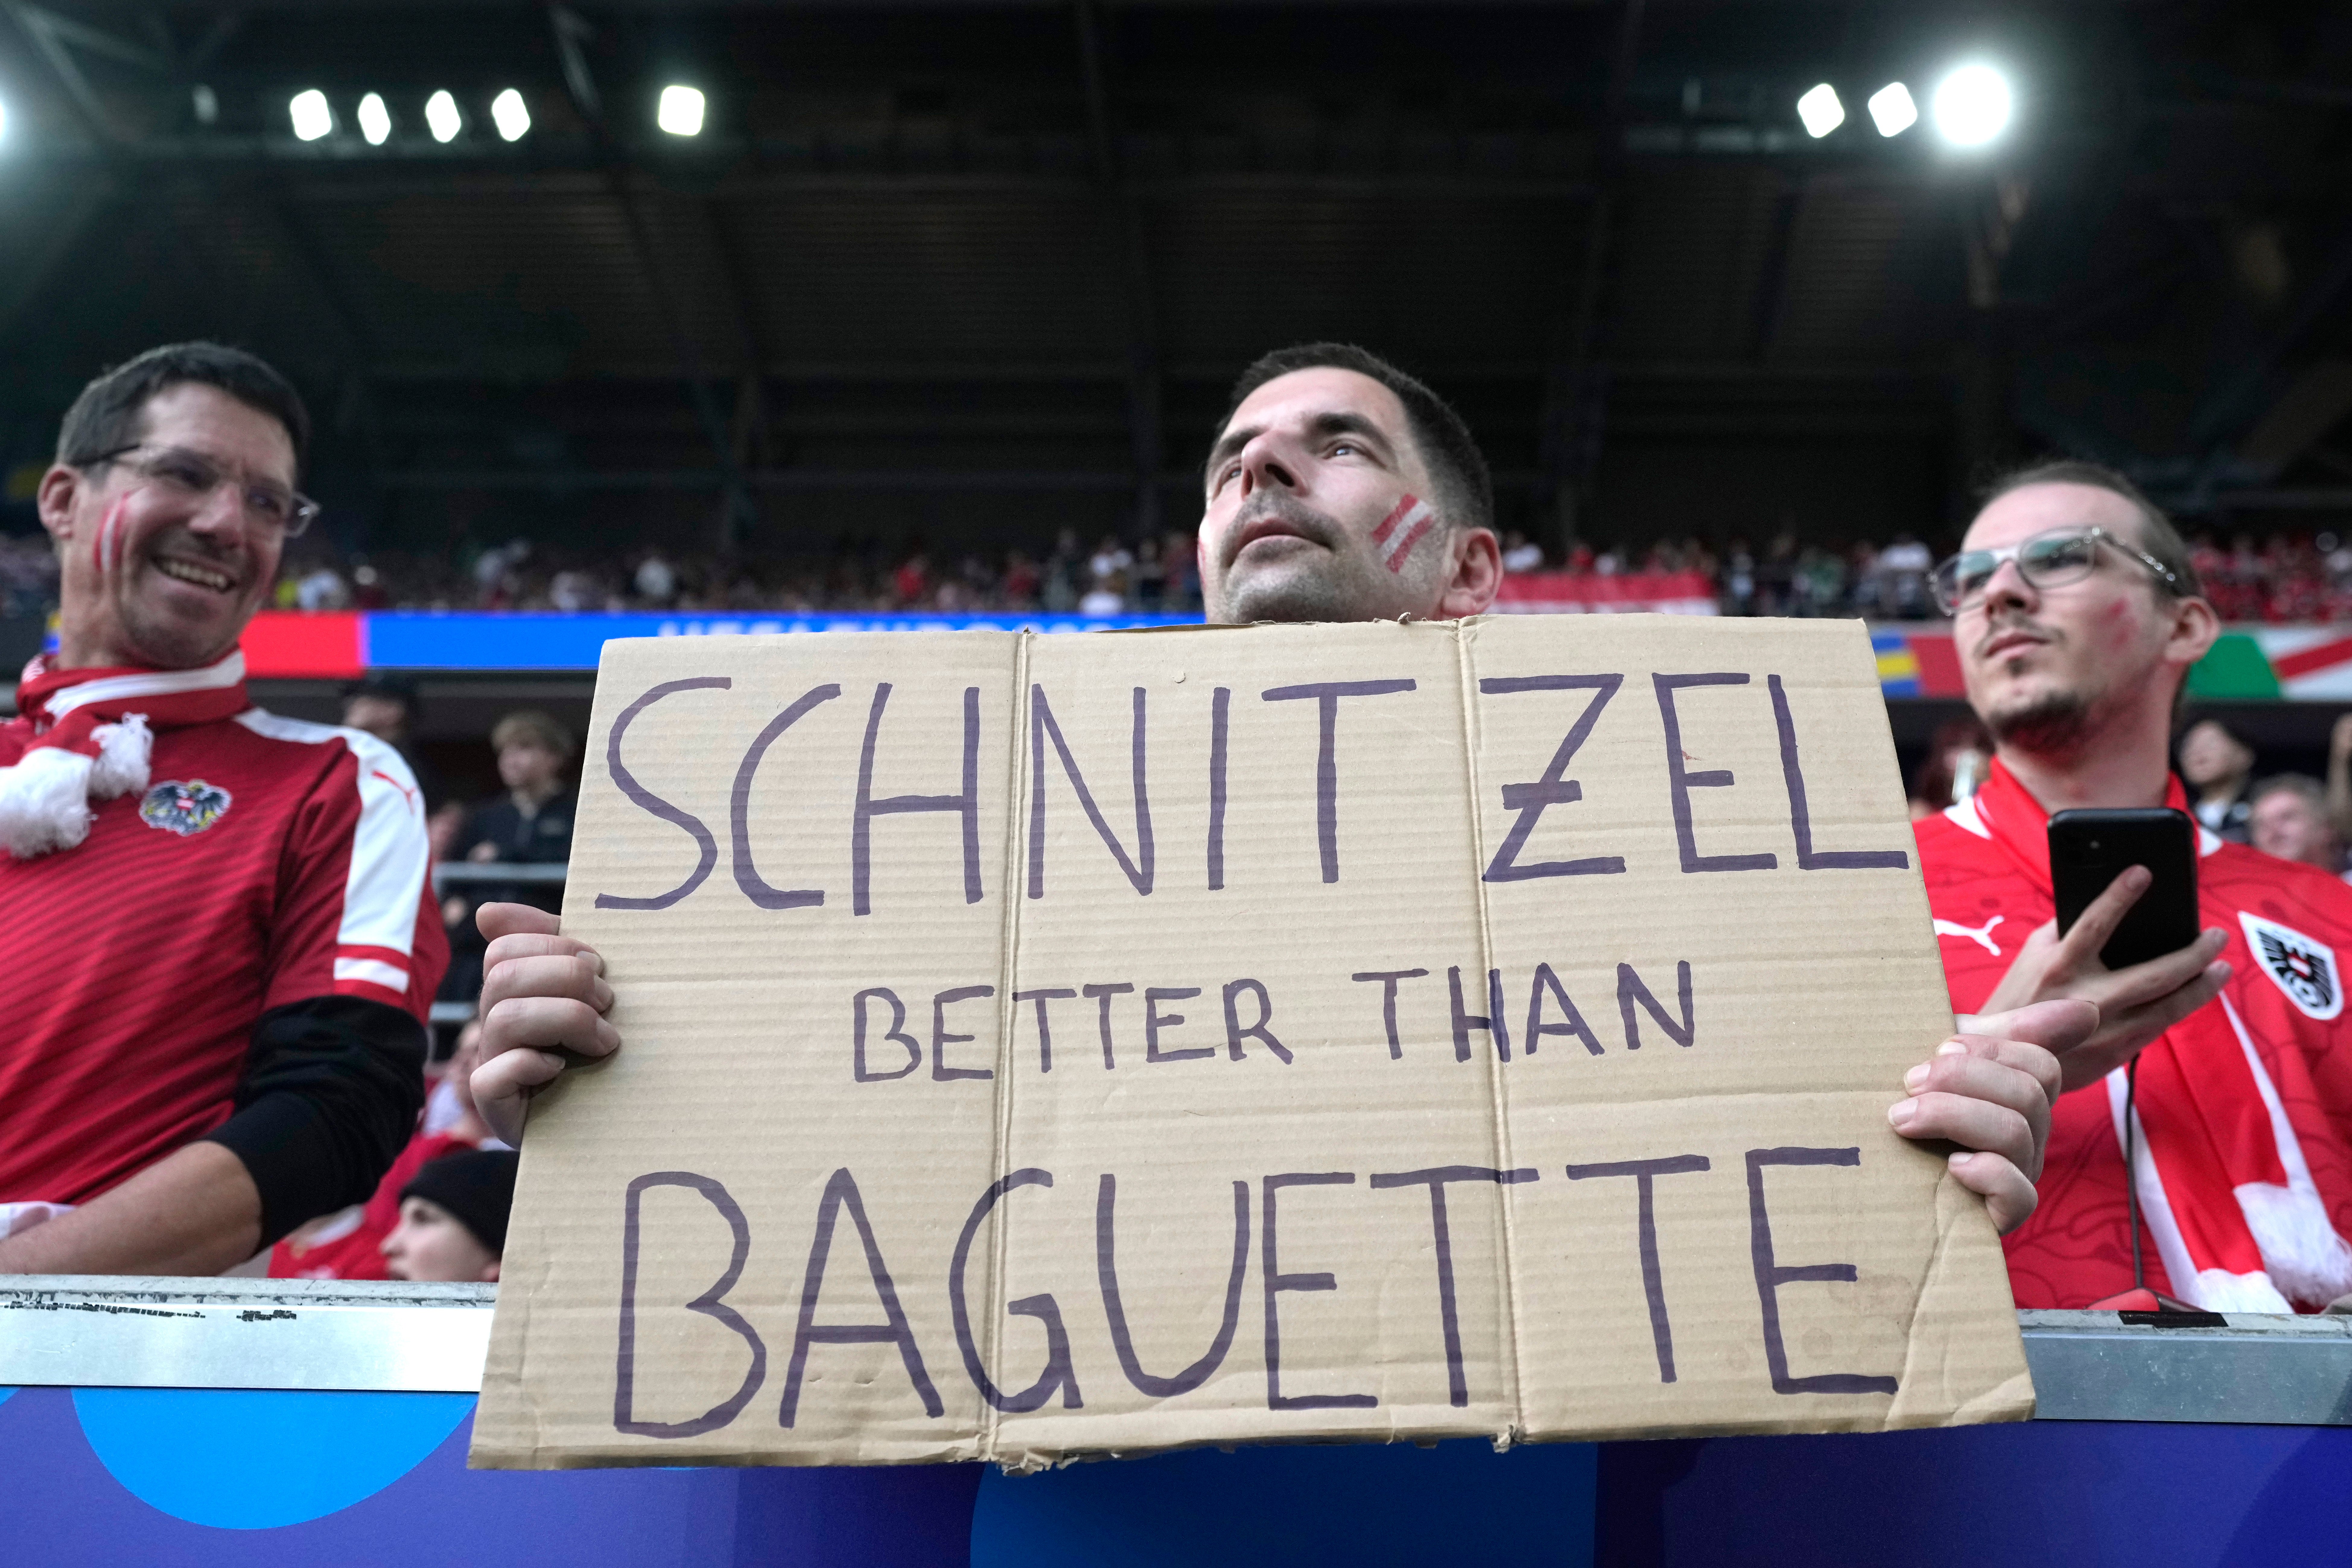 Austrian fans taunt French fans ahead of their Group D match on Monday